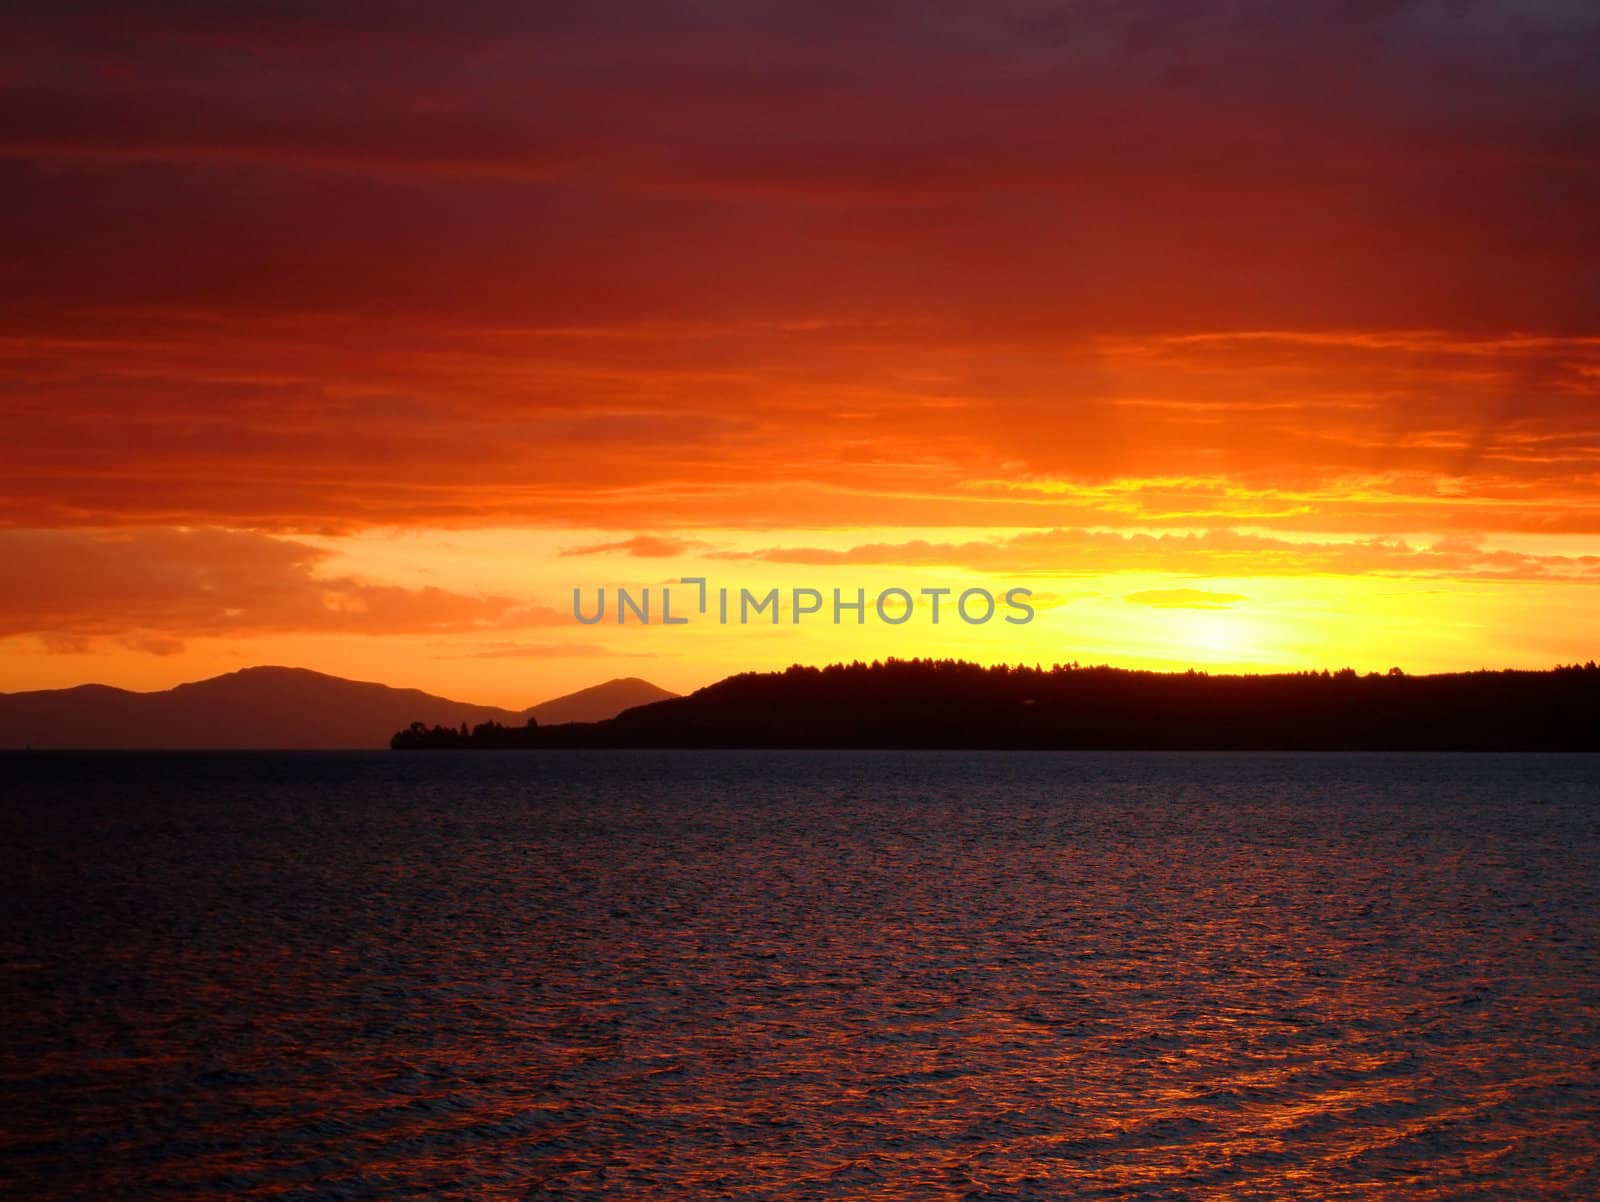 Deep red sunset over Lake Taupo, New Zealand by Cloudia